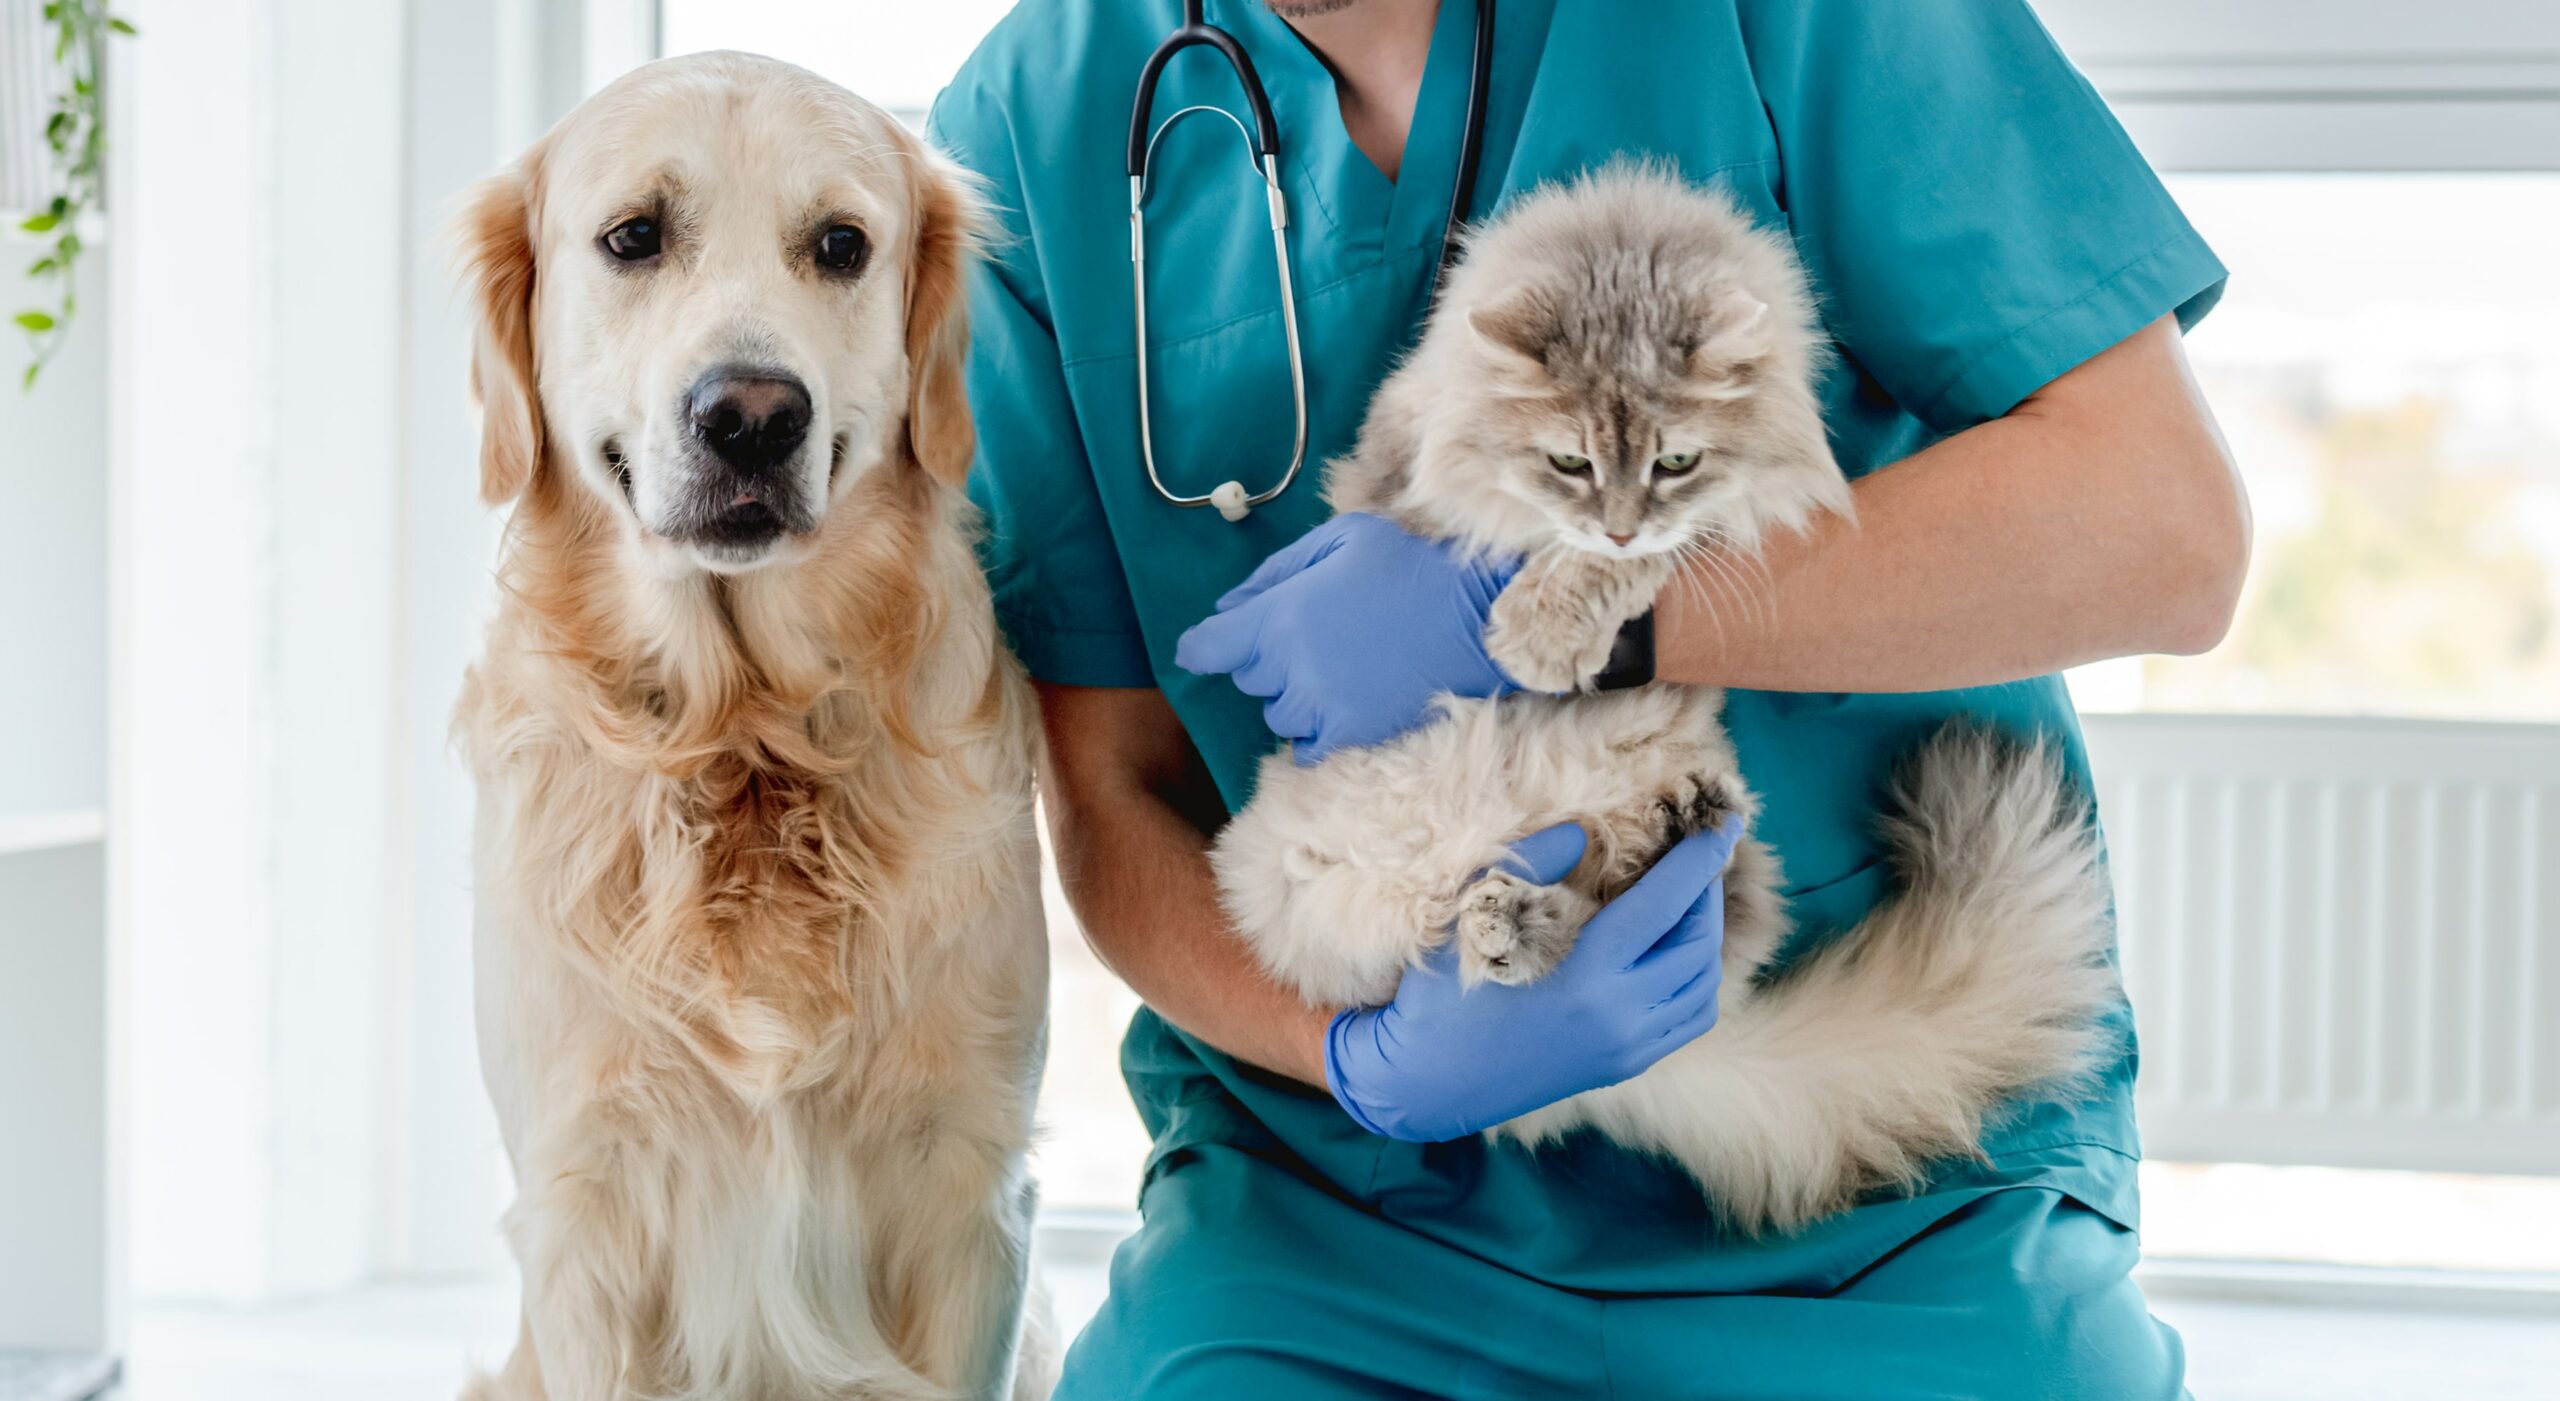 vet with dog and cat in cliniin